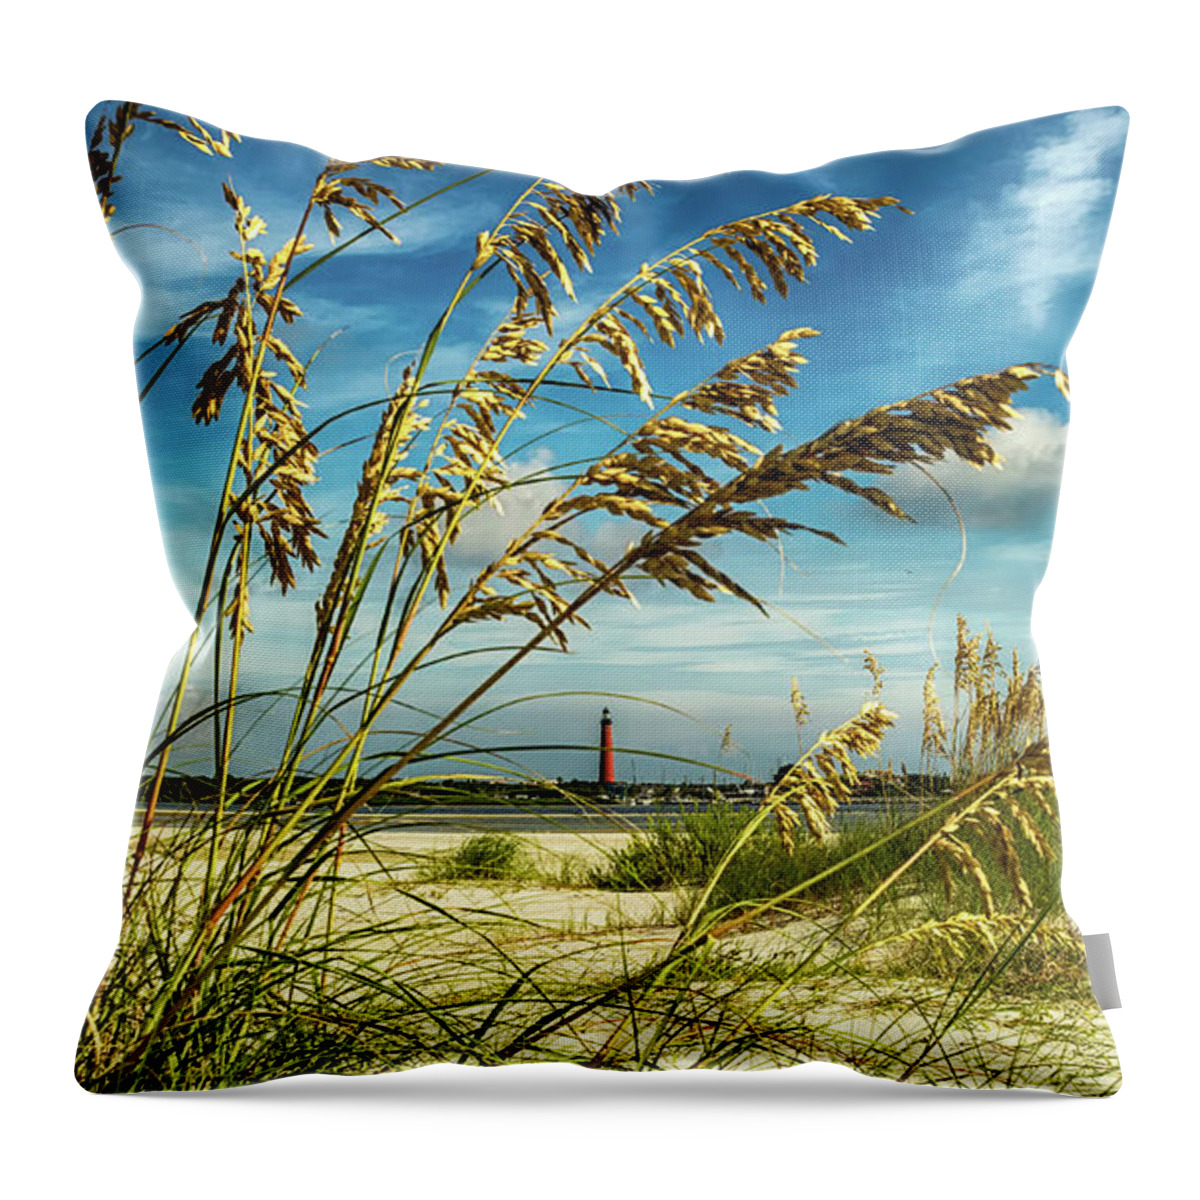 Light Throw Pillow featuring the photograph Ponce Inlet Lighthouse by Dillon Kalkhurst